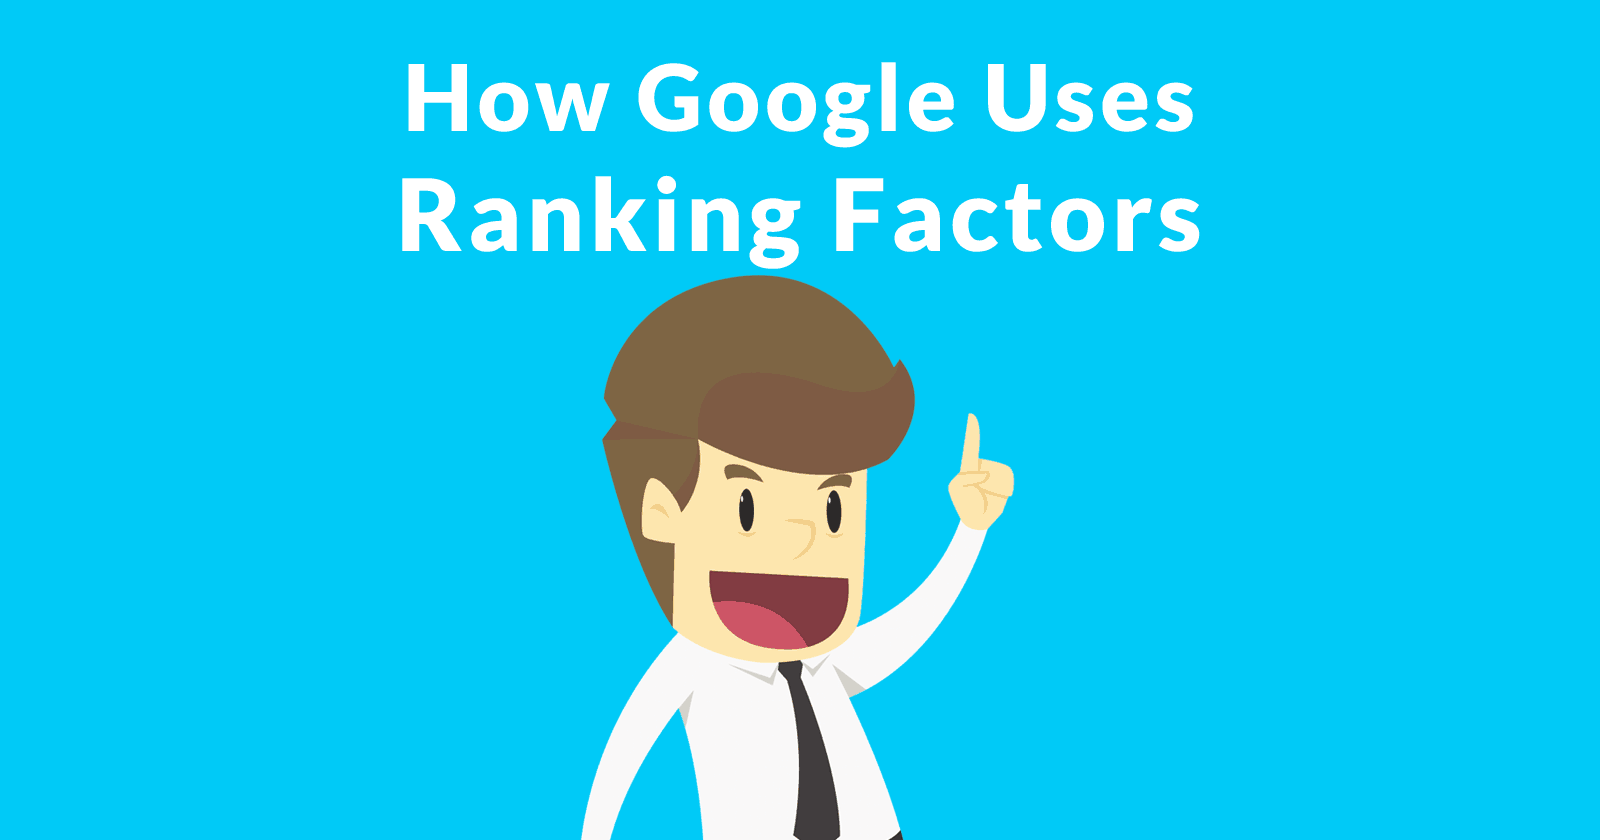 Image of a man having a Eureka moment, with text that says, How Google Users Ranking Factors